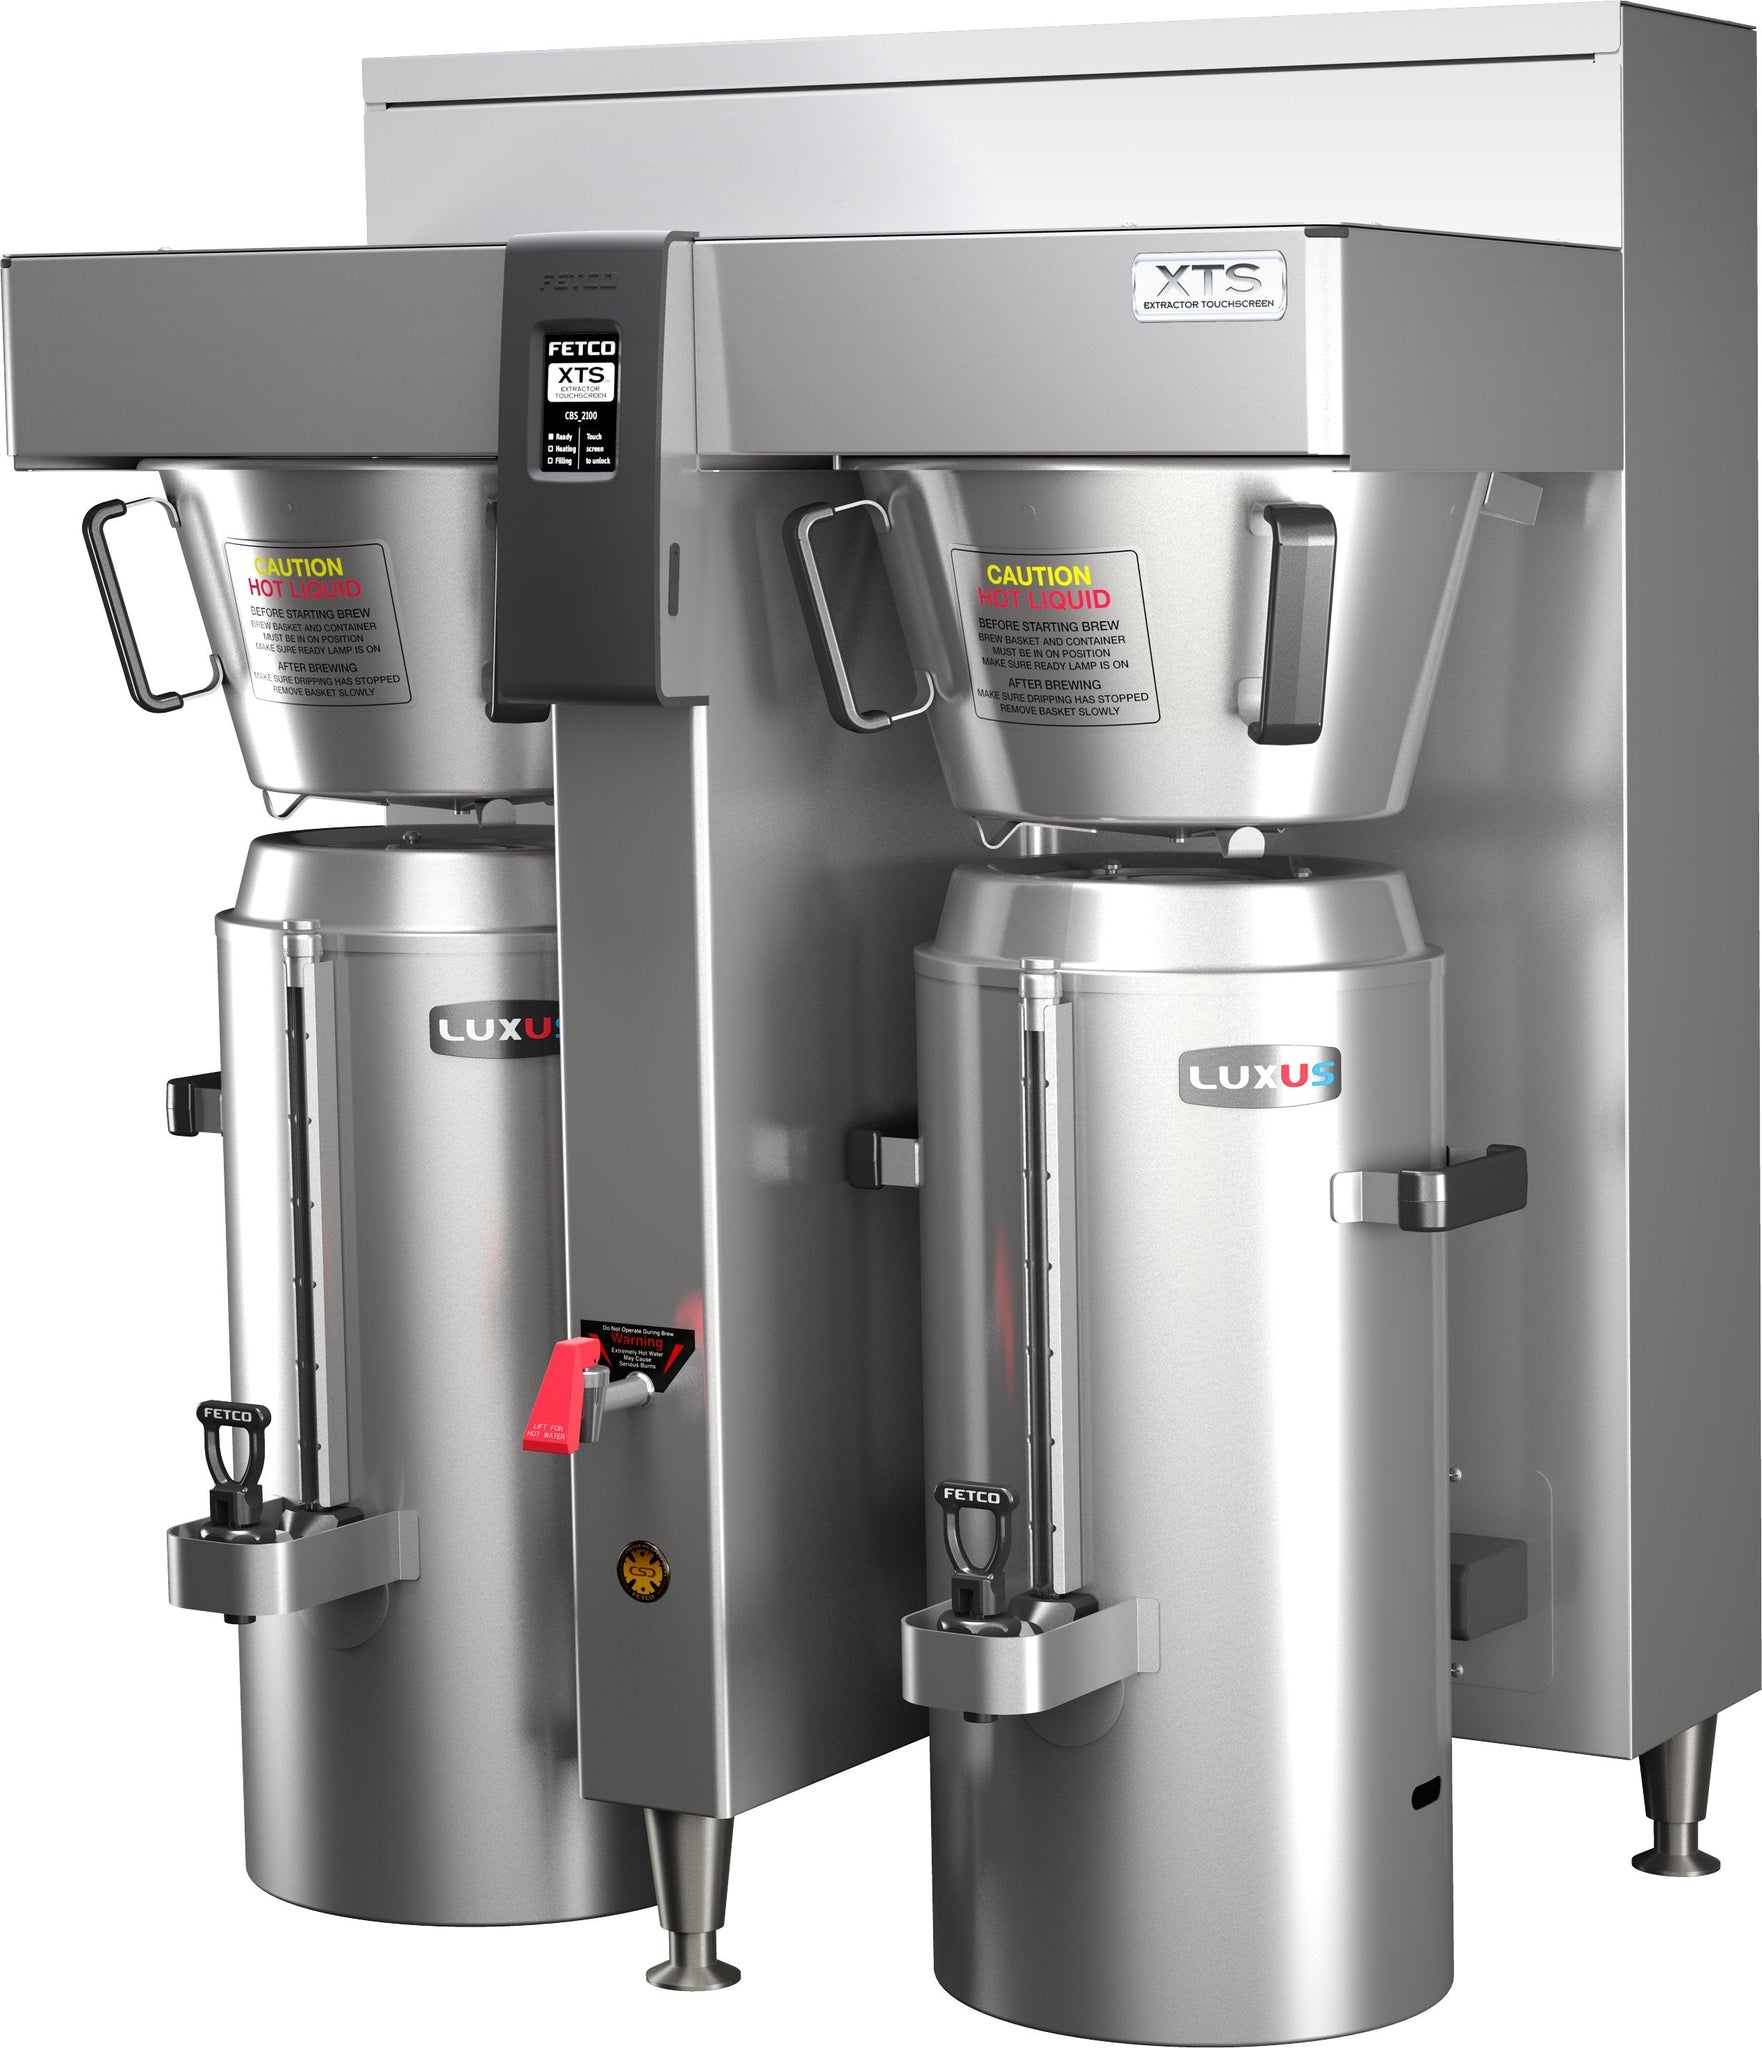 Fetco - Touchscreen Series Coffee Brewer Double Station 6 x 3 kW 200-240V - CBS-2162XTS